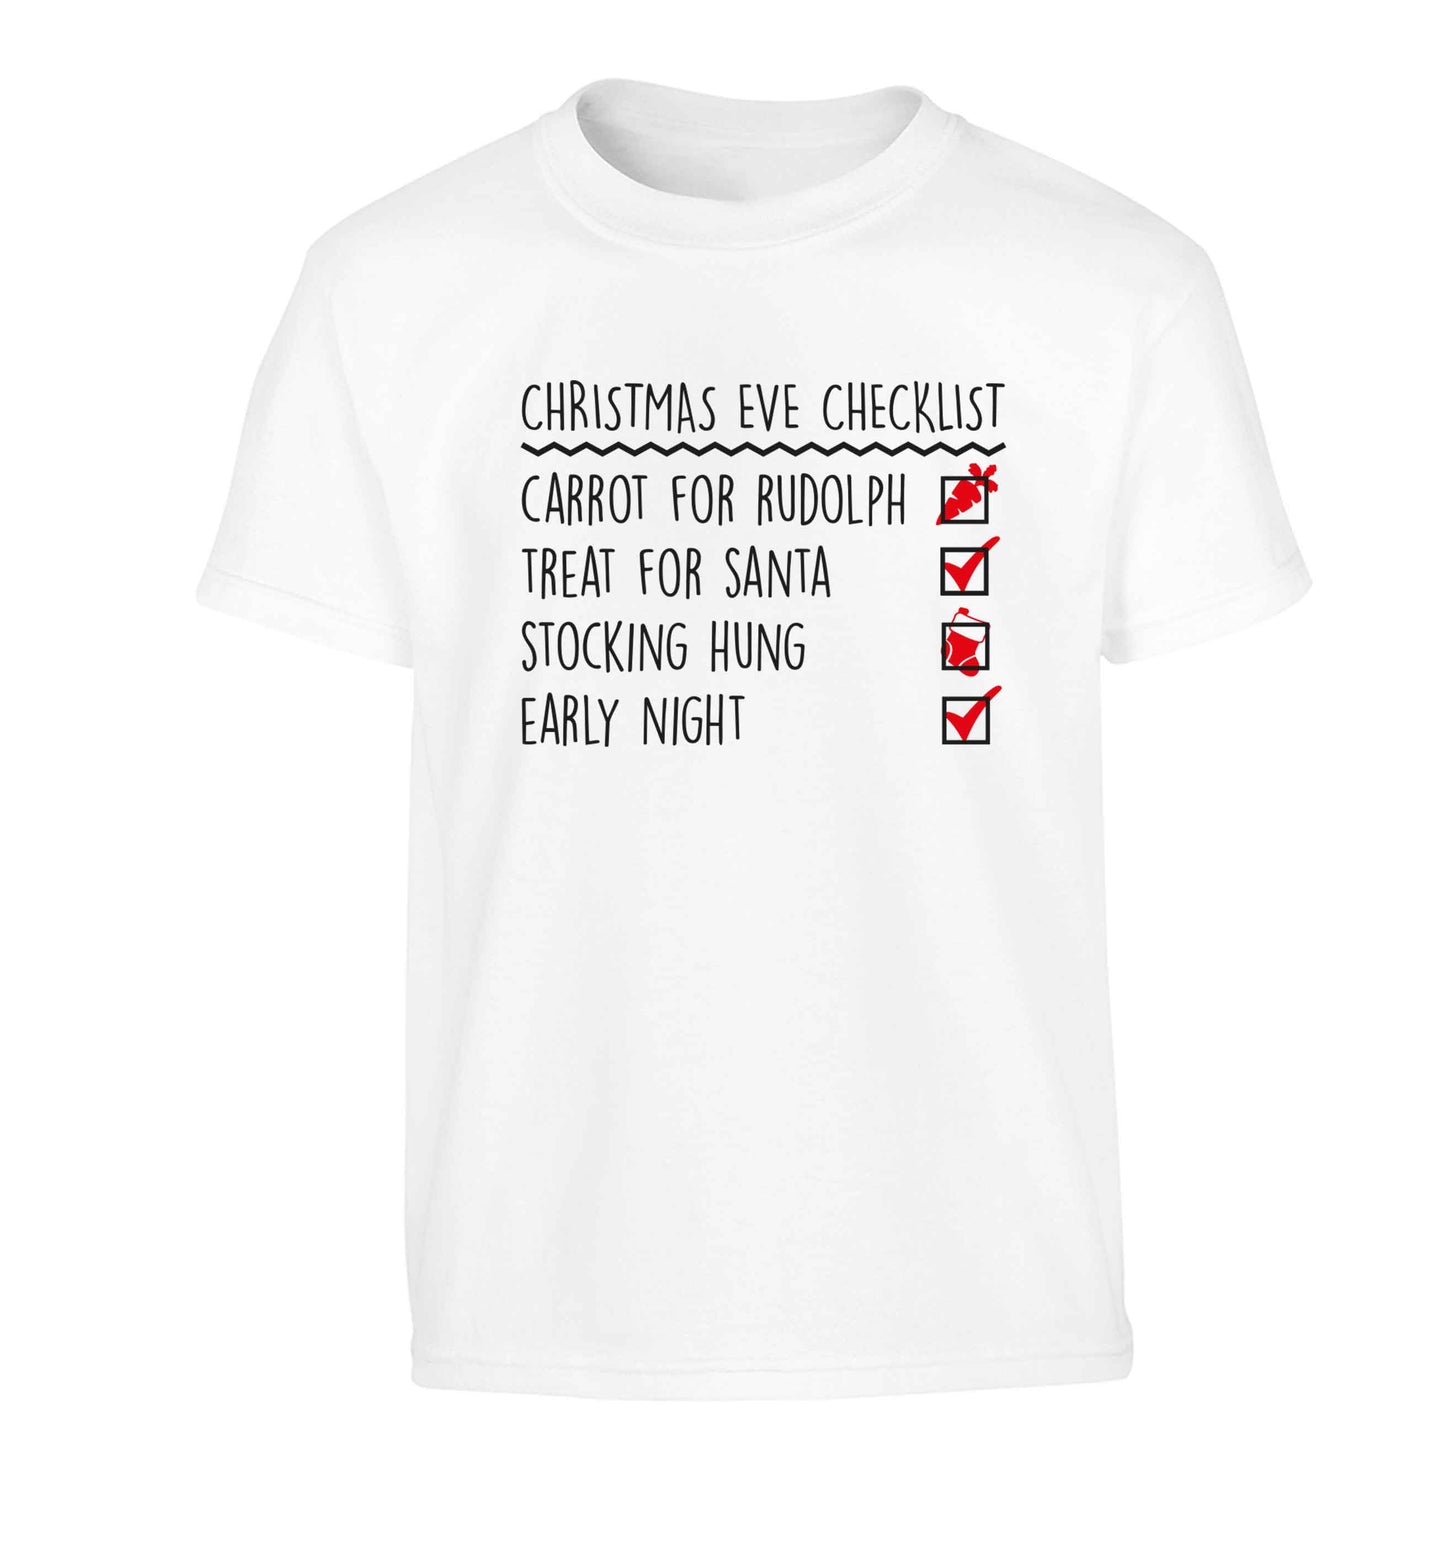 Candy Canes Candy Corns Children's white Tshirt 12-13 Years